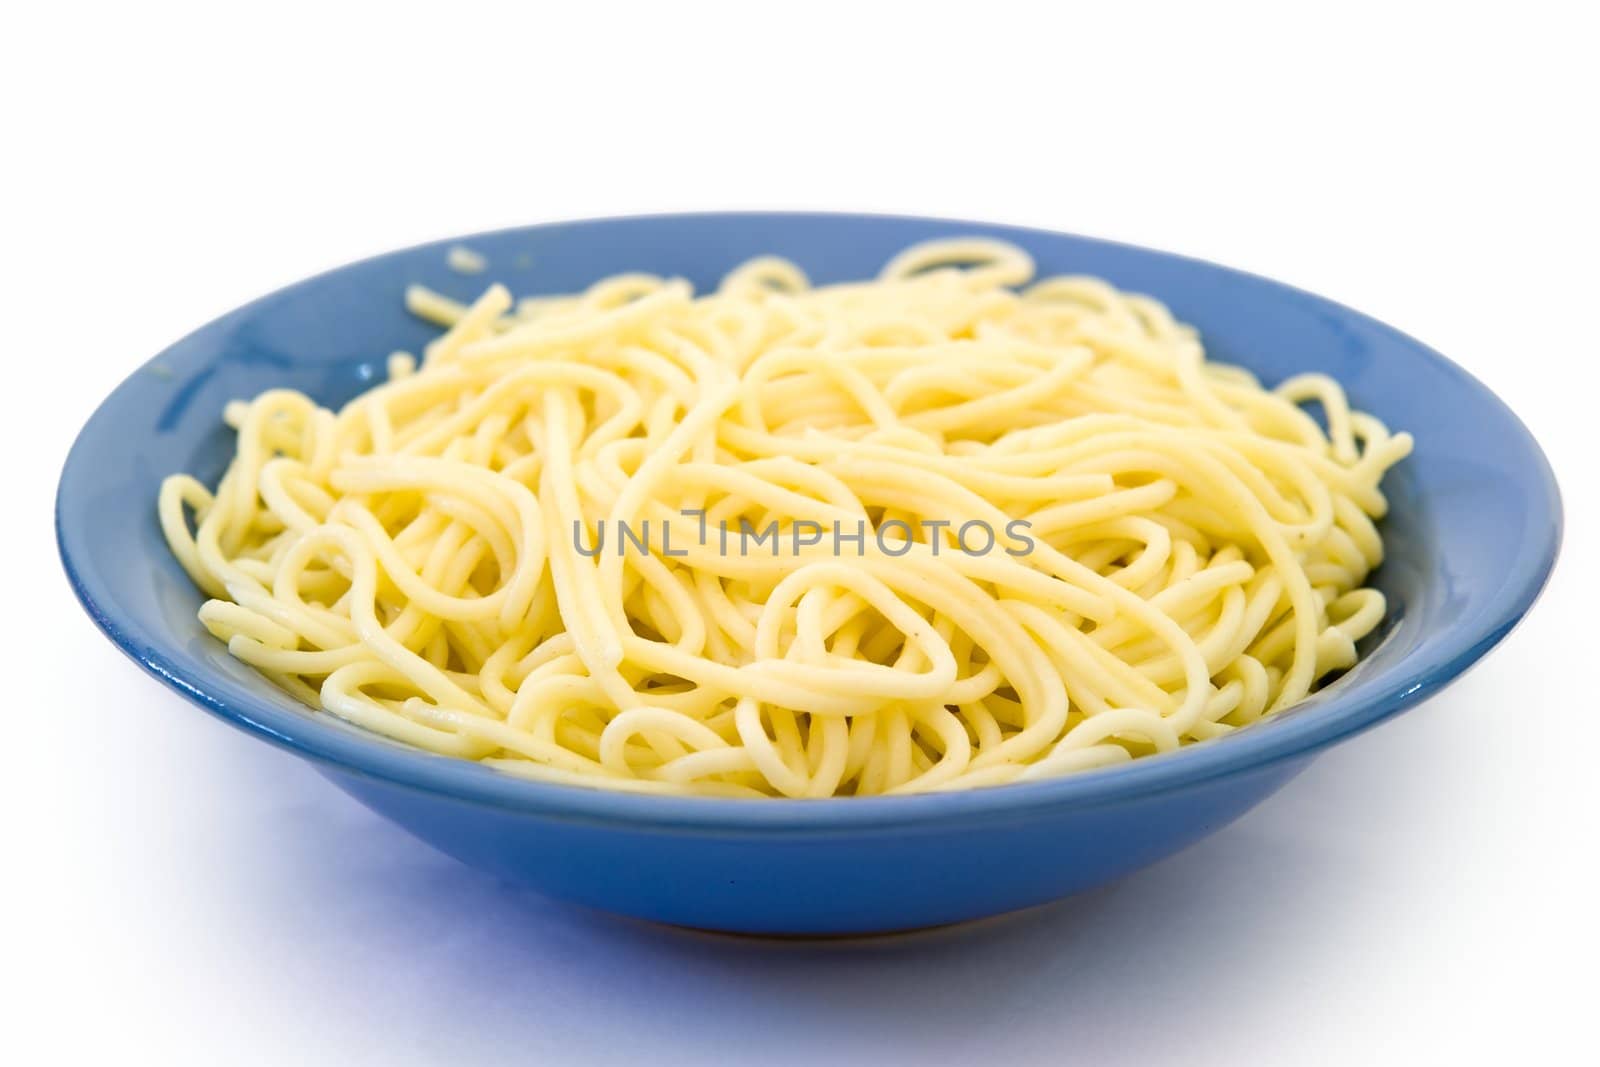 Spaghetti in a blue plate on a white background